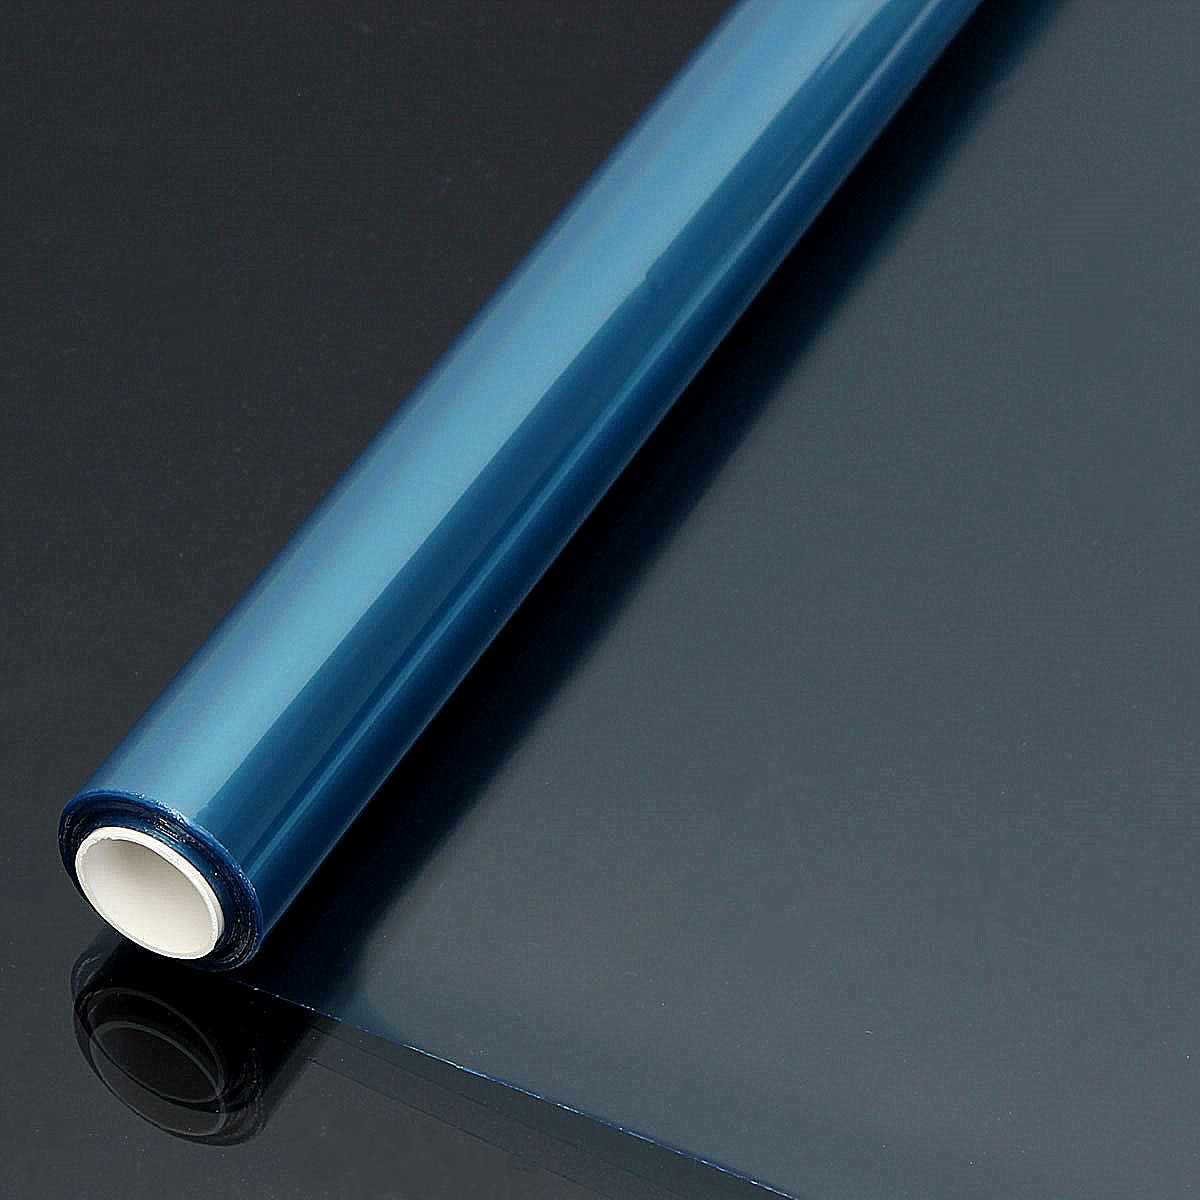 2020 PCB Portable Photosensitive Dry Film for Circuit Production Photoresist Sheets 30cm x 5m For plating hole covering etching